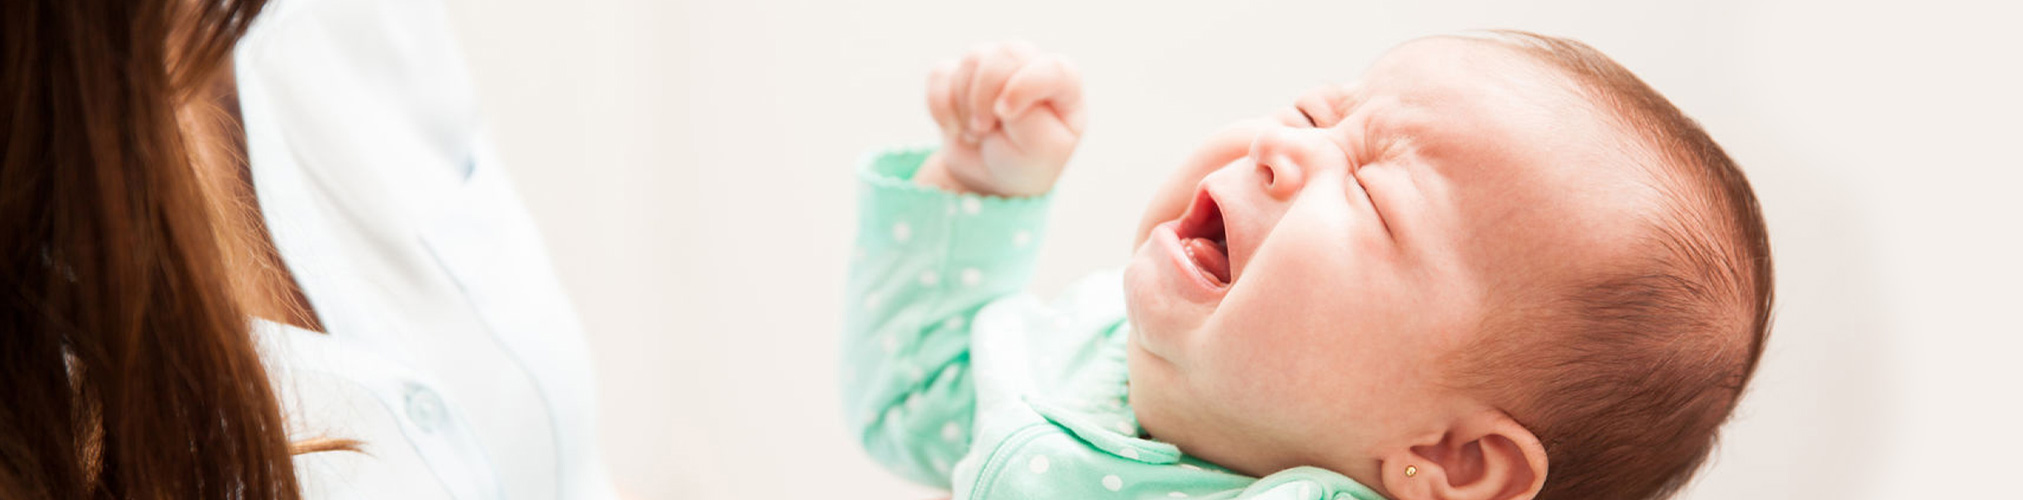 crying baby - shaken baby syndrome prevention